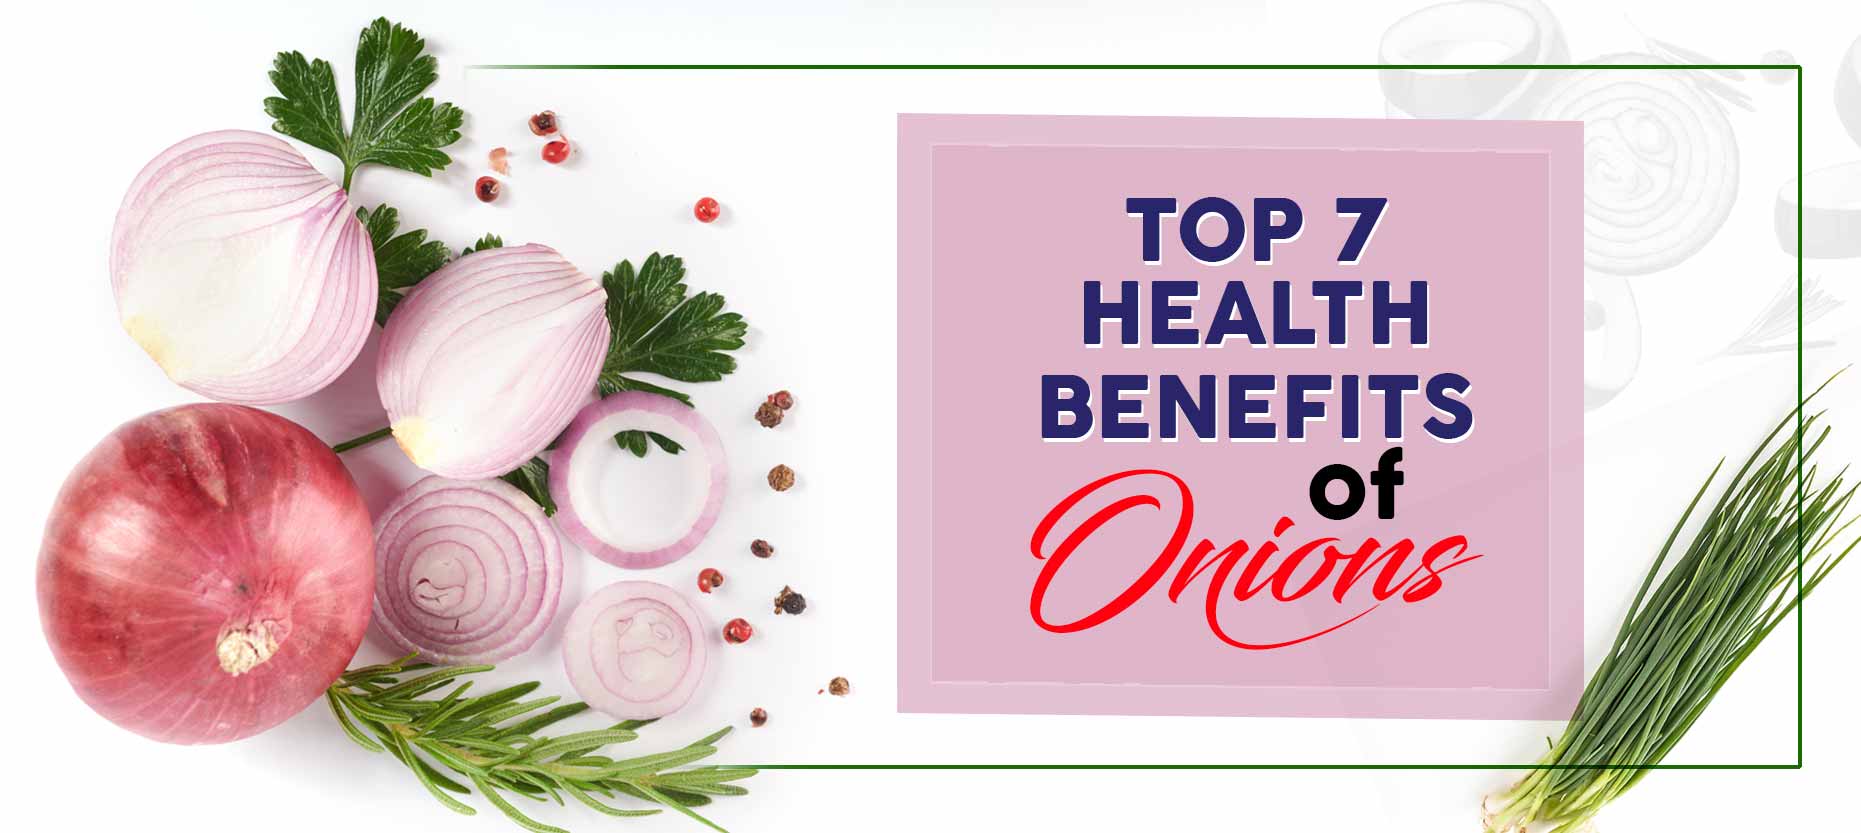 Top 7 Health Benefits of Onions